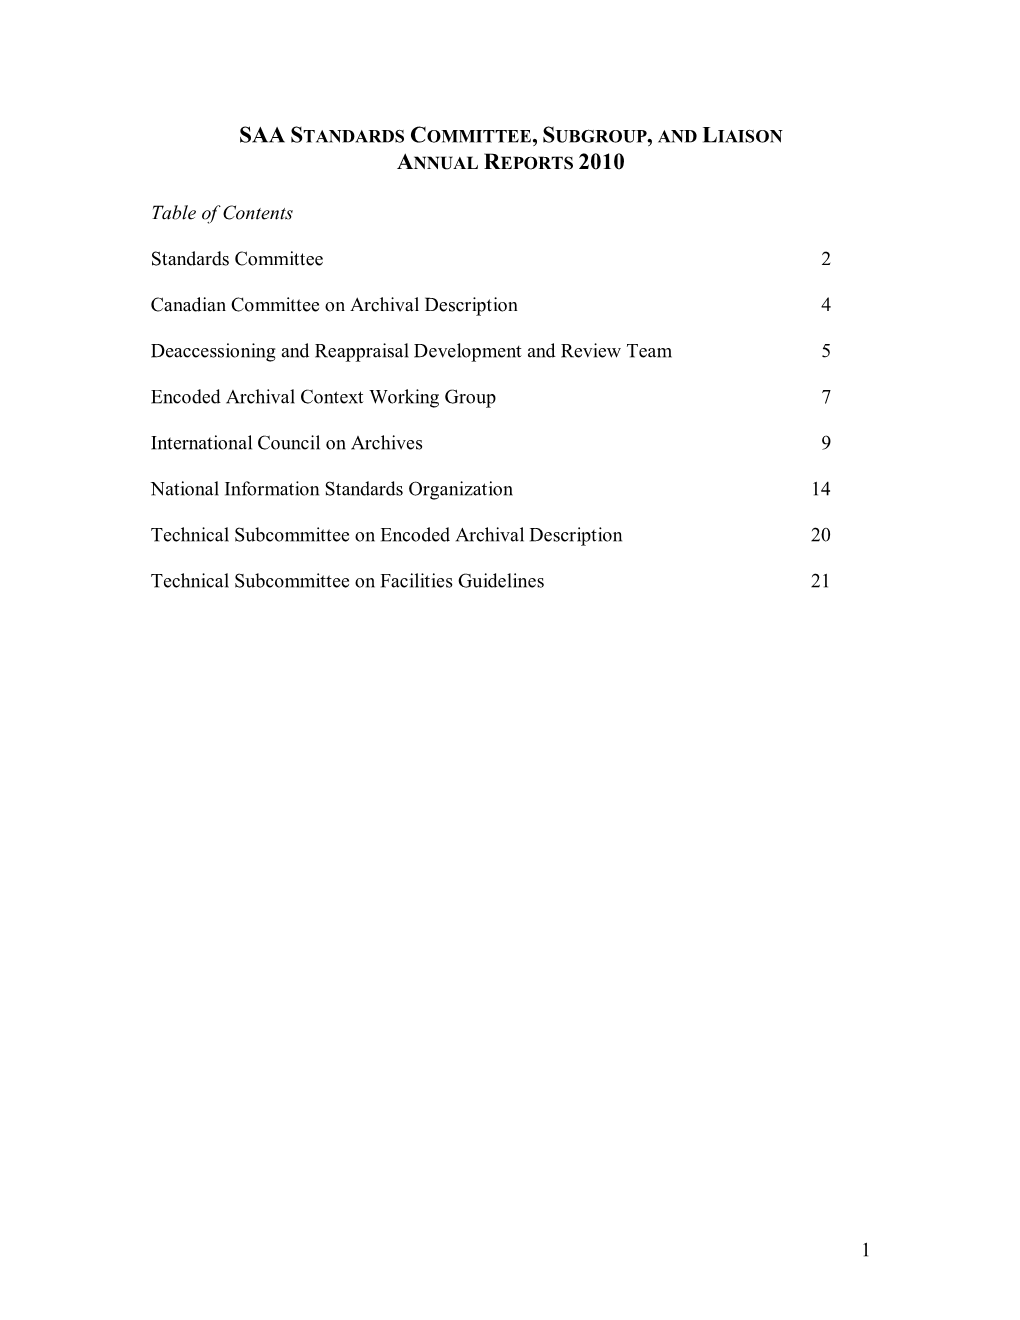 Saa Standards Committee, Subgroup, and Liaison Annual Reports 2010